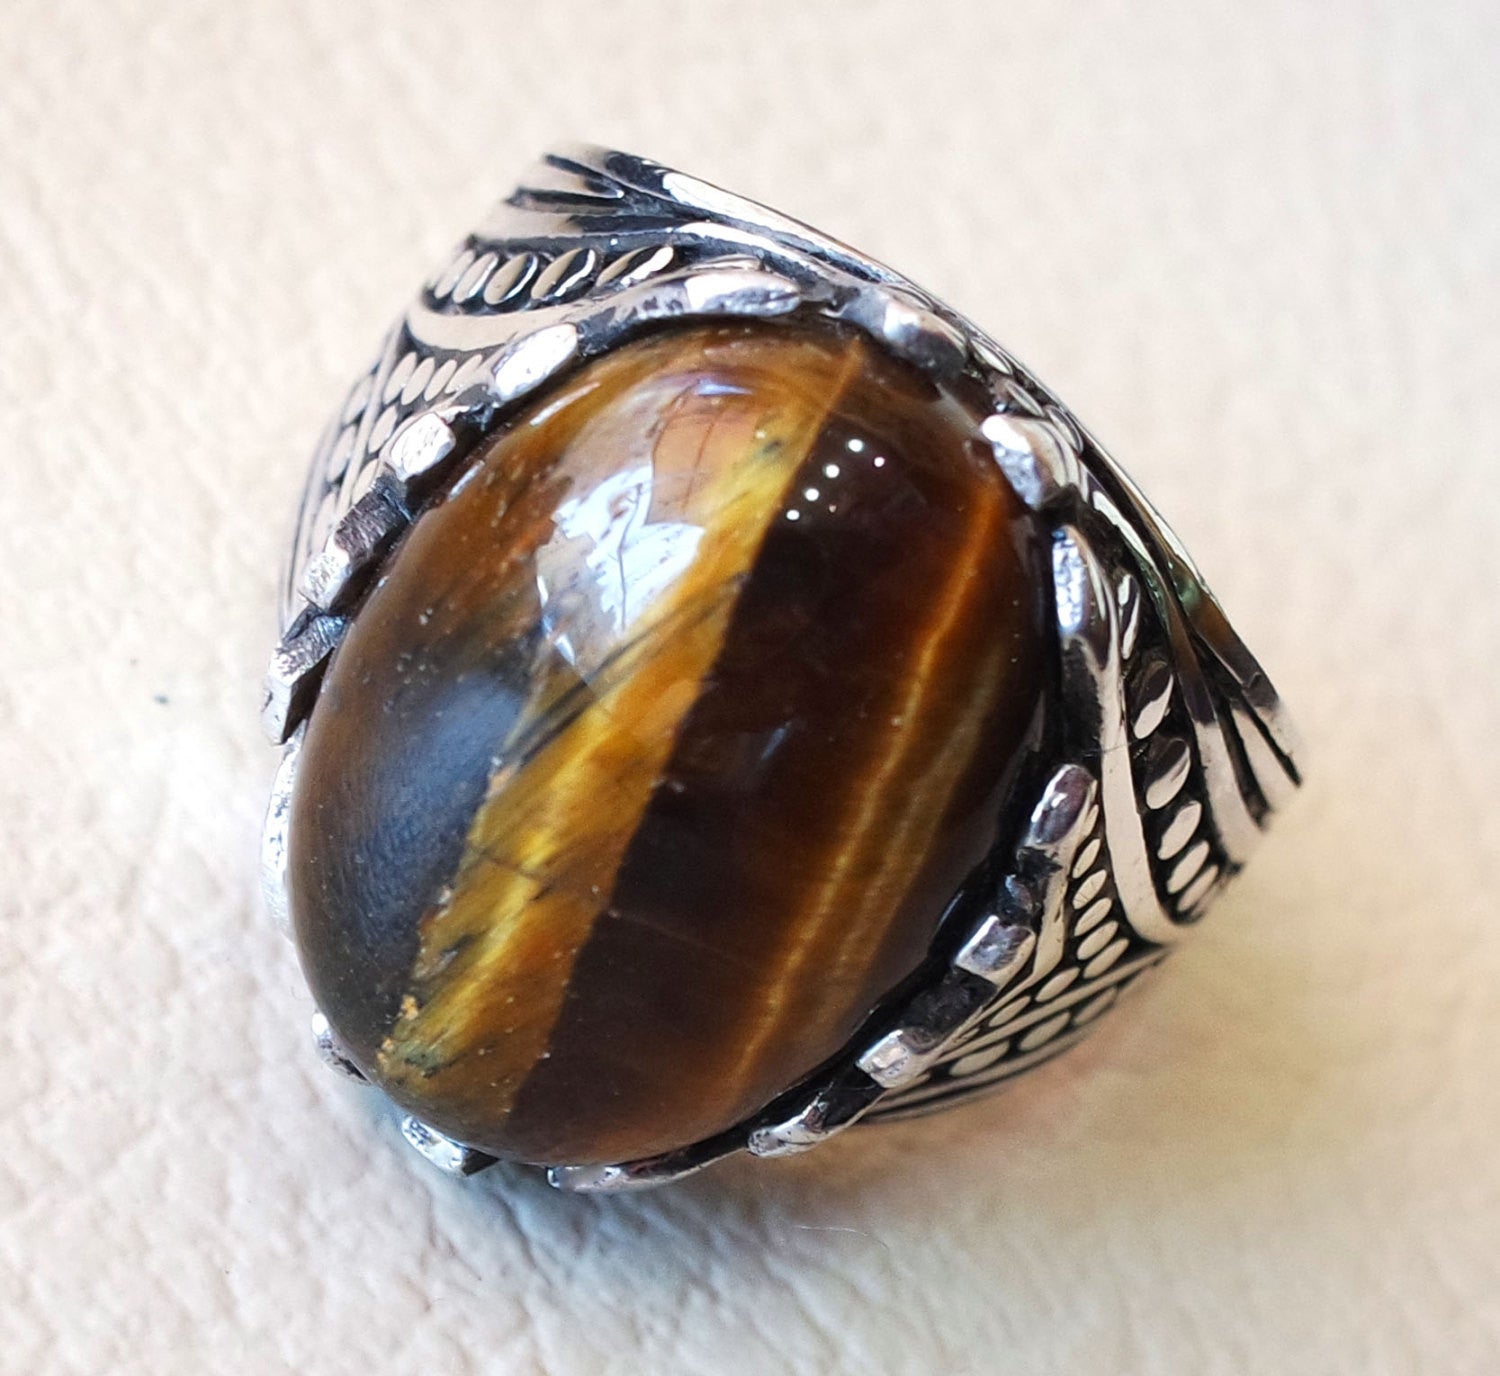 cat eye tiger eye semi precious natural cabochon stone men ring sterling silver 925 any size ottoman turkish middle eastern arabic jewelry